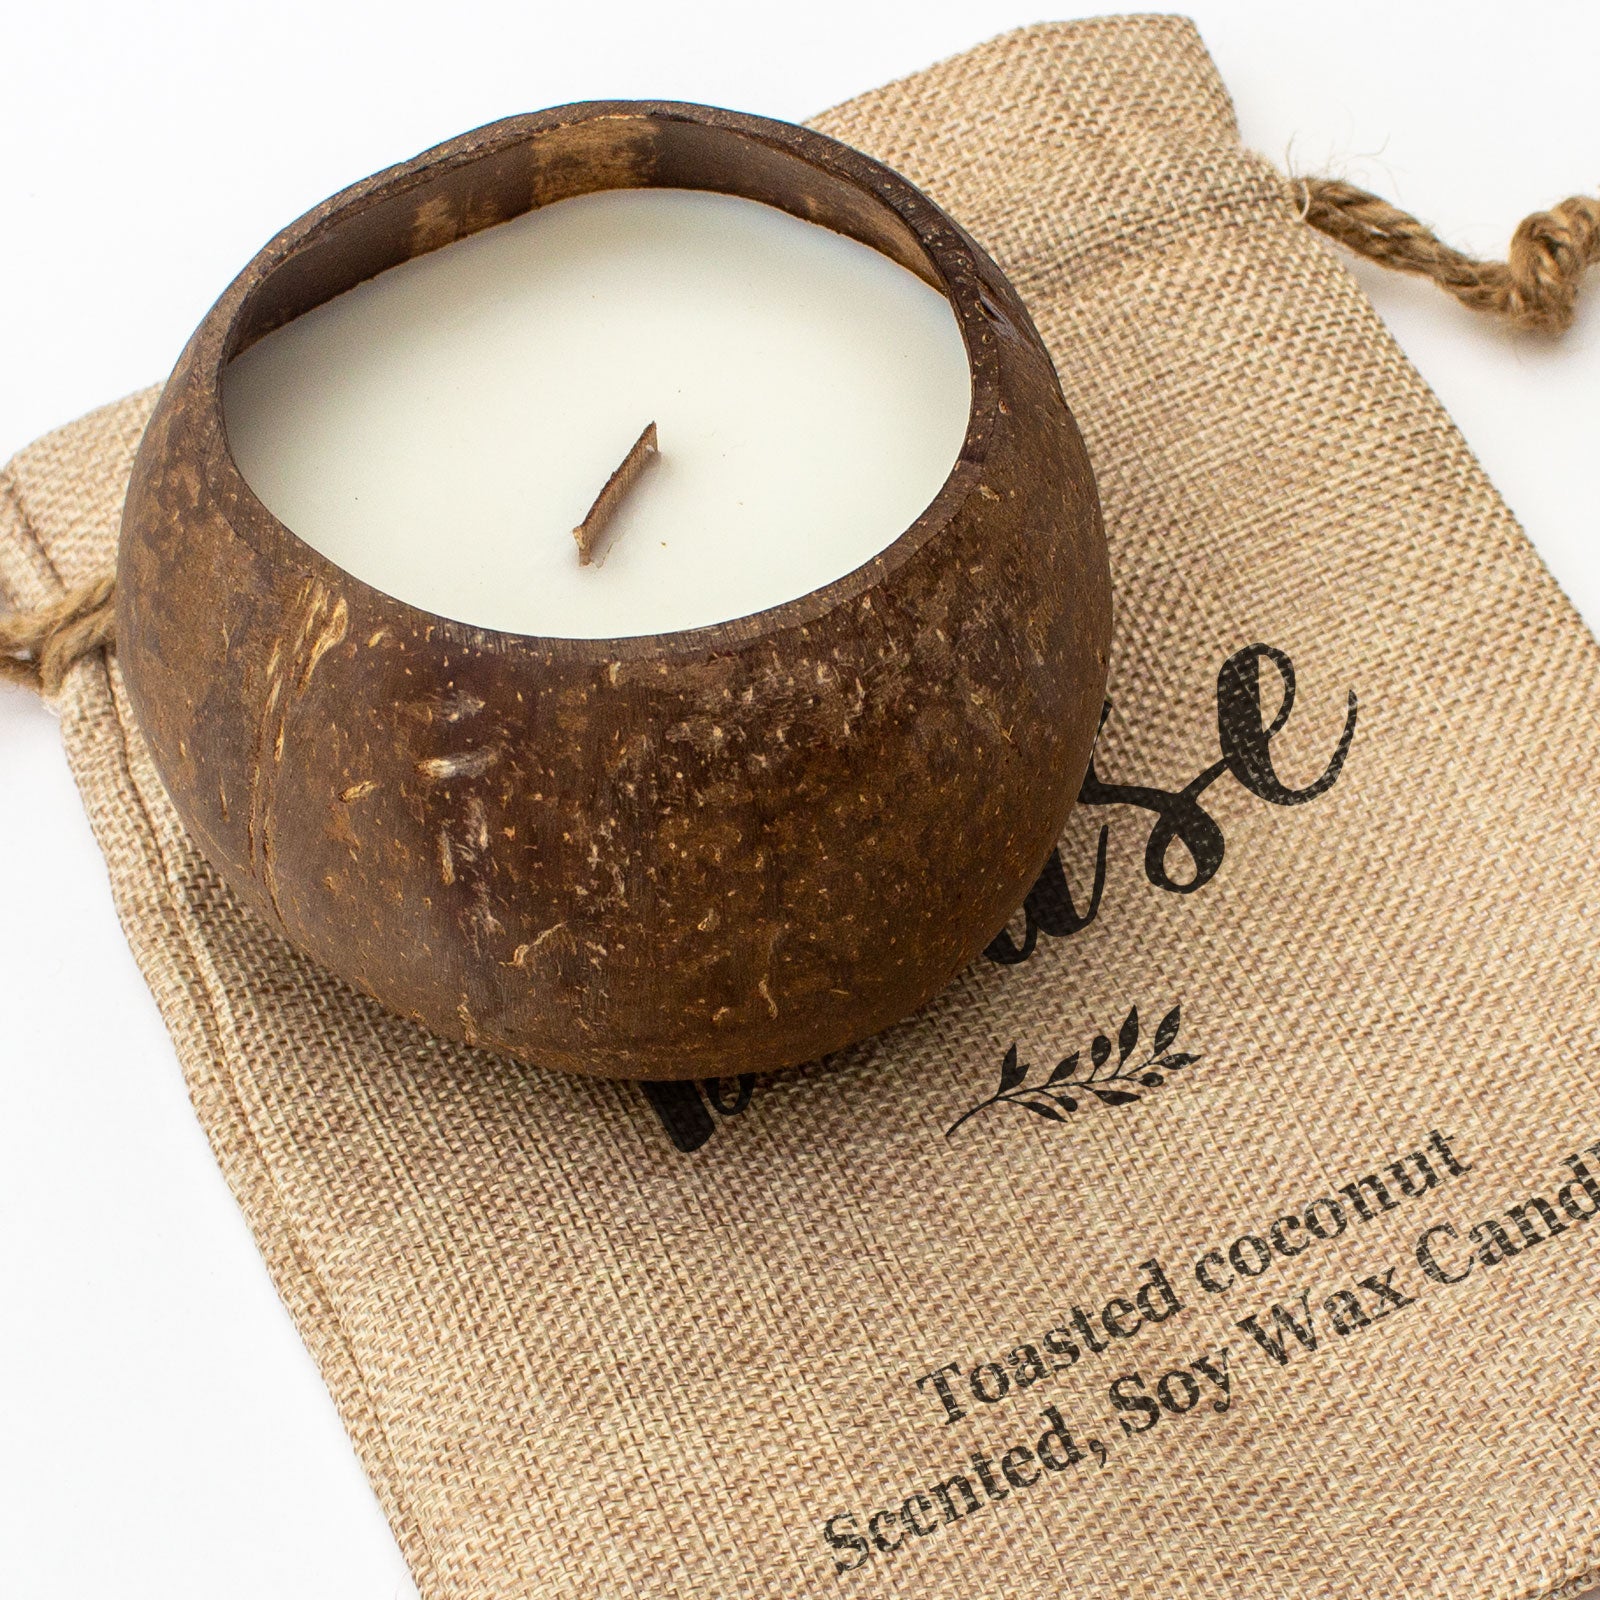 DENISE - Toasted Coconut Bowl Candle – Soy Wax - Gift Present